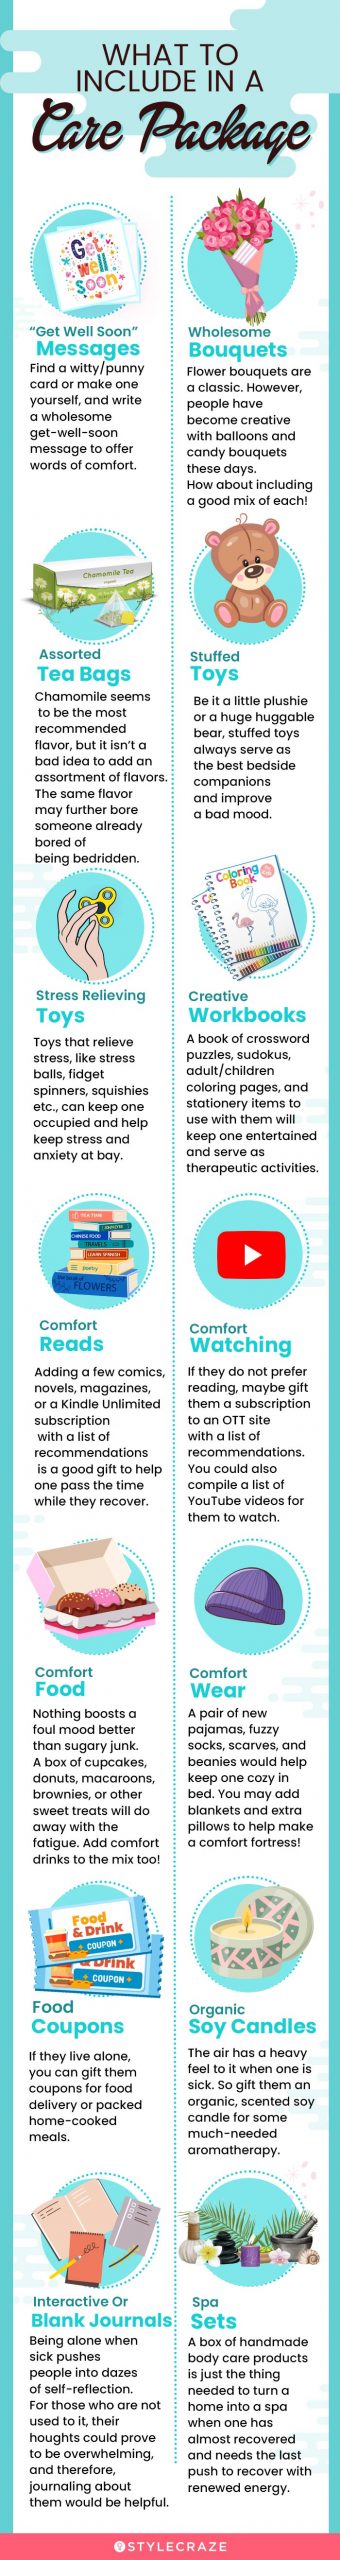  what to include in a care package (infographic) 